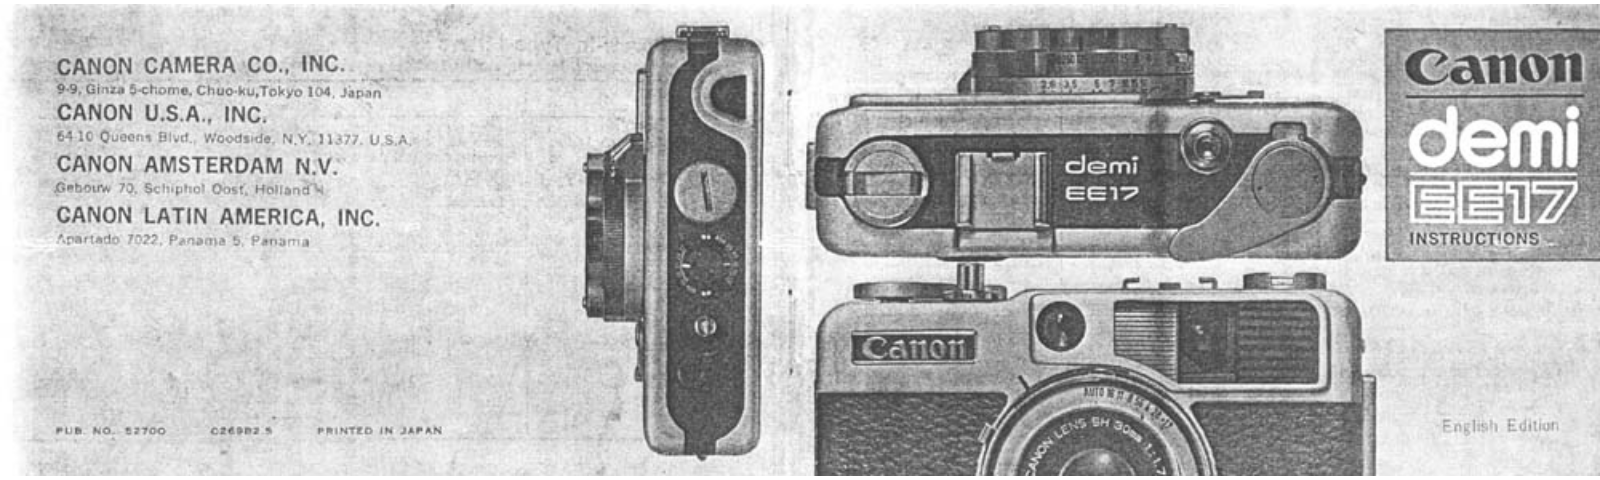 Canon Demi EE17 Operating Instructions